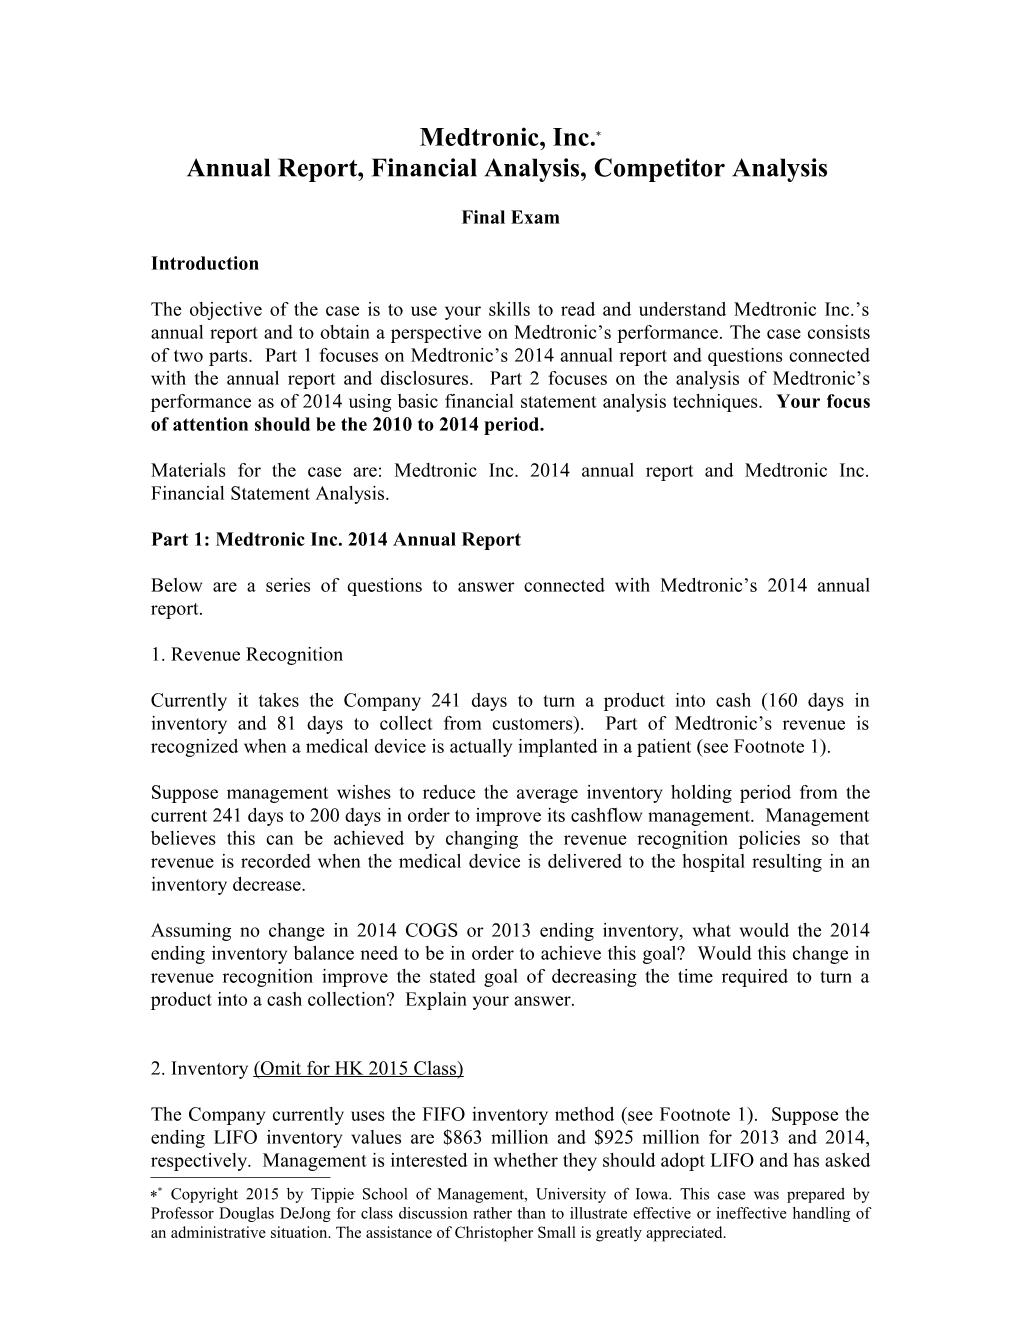 Annual Report, Financial Analysis, Competitor Analysis